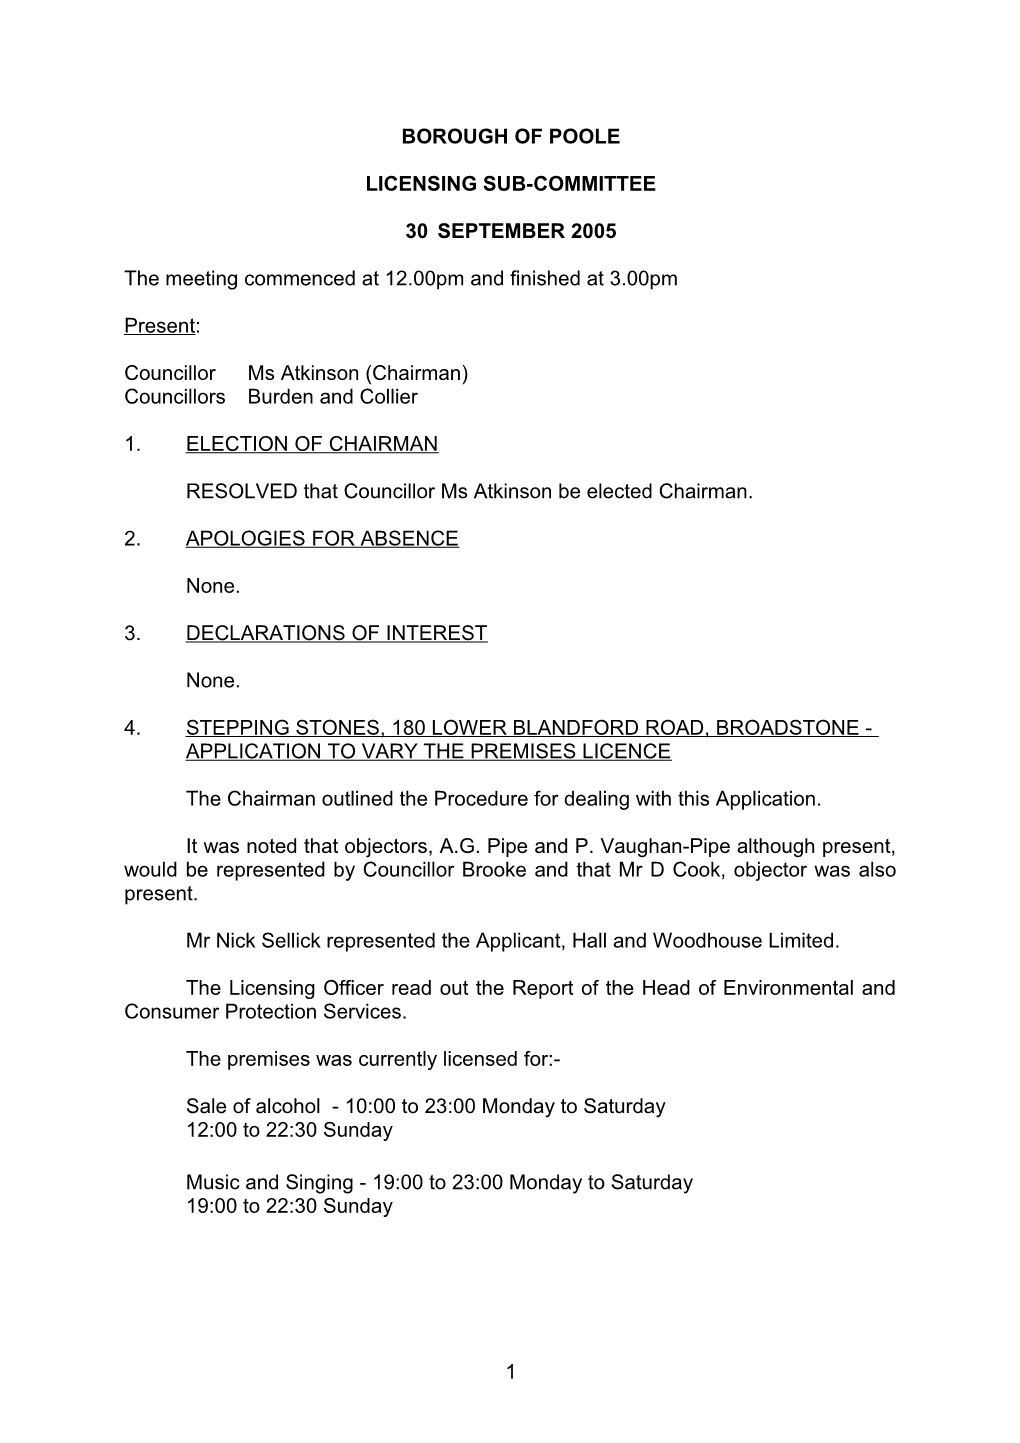 Minutes - Licensing Sub-Committee - 30 September 2005